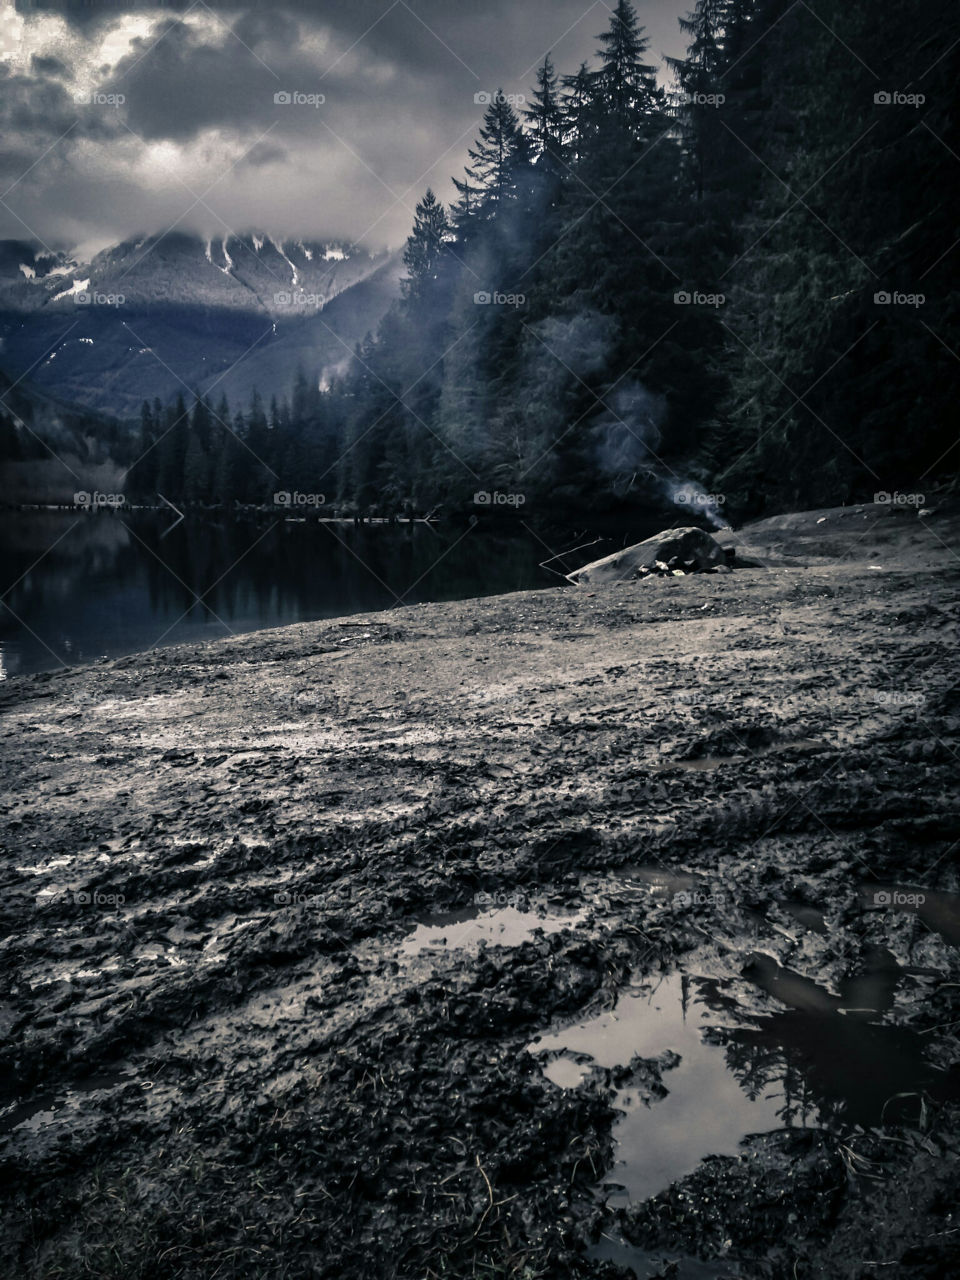 Winter camping in BC. Muddy shore of a lake surrounded by mountains